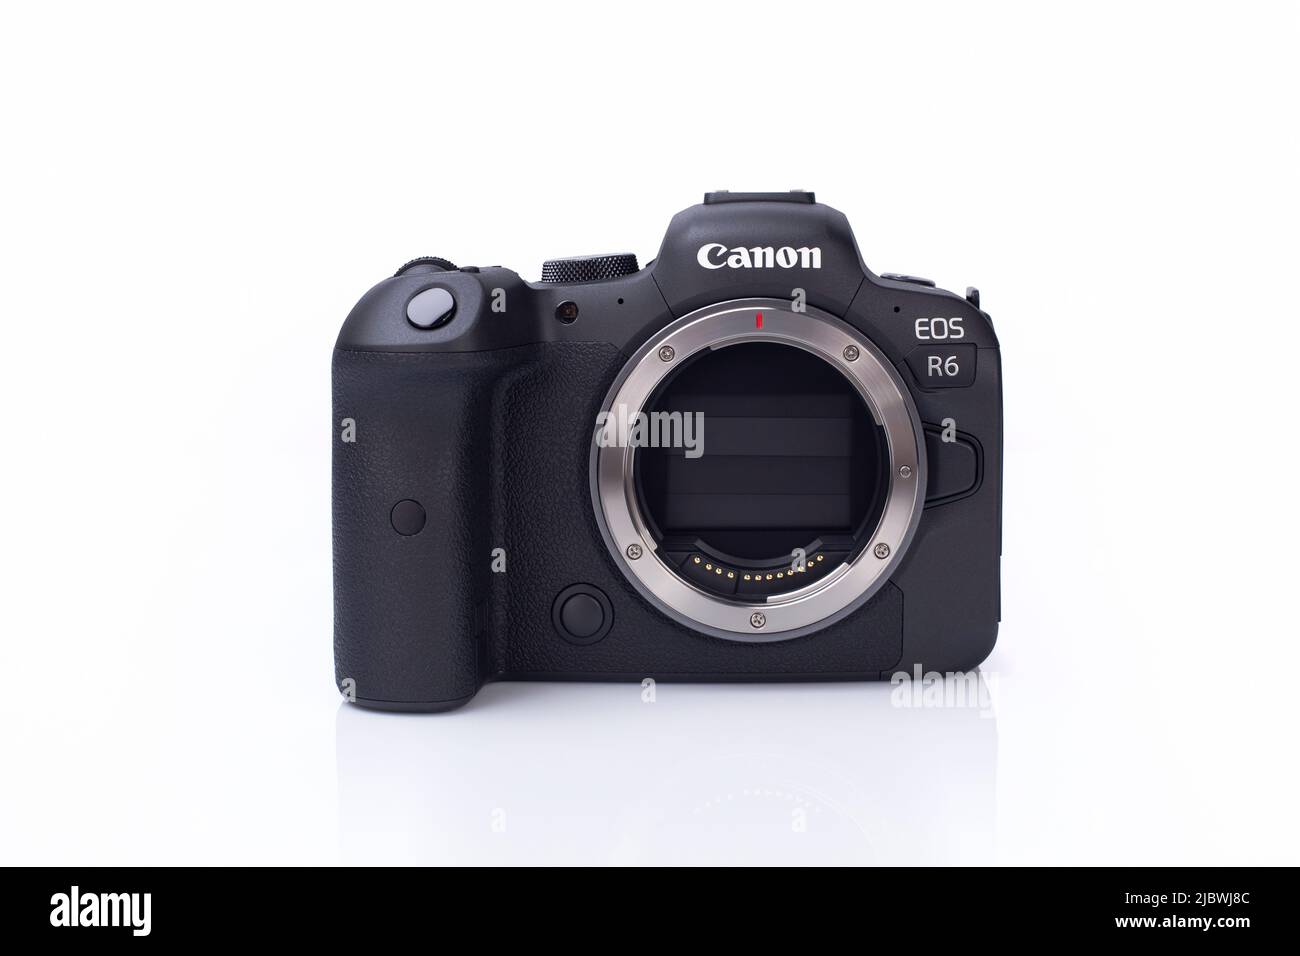 Galati, Romania - October 12, 2021: When camera Canon EOS R6 is turned off, shutter closes to protect sensor from dust. Canon R6 Full Frame Mirrorless Stock Photo